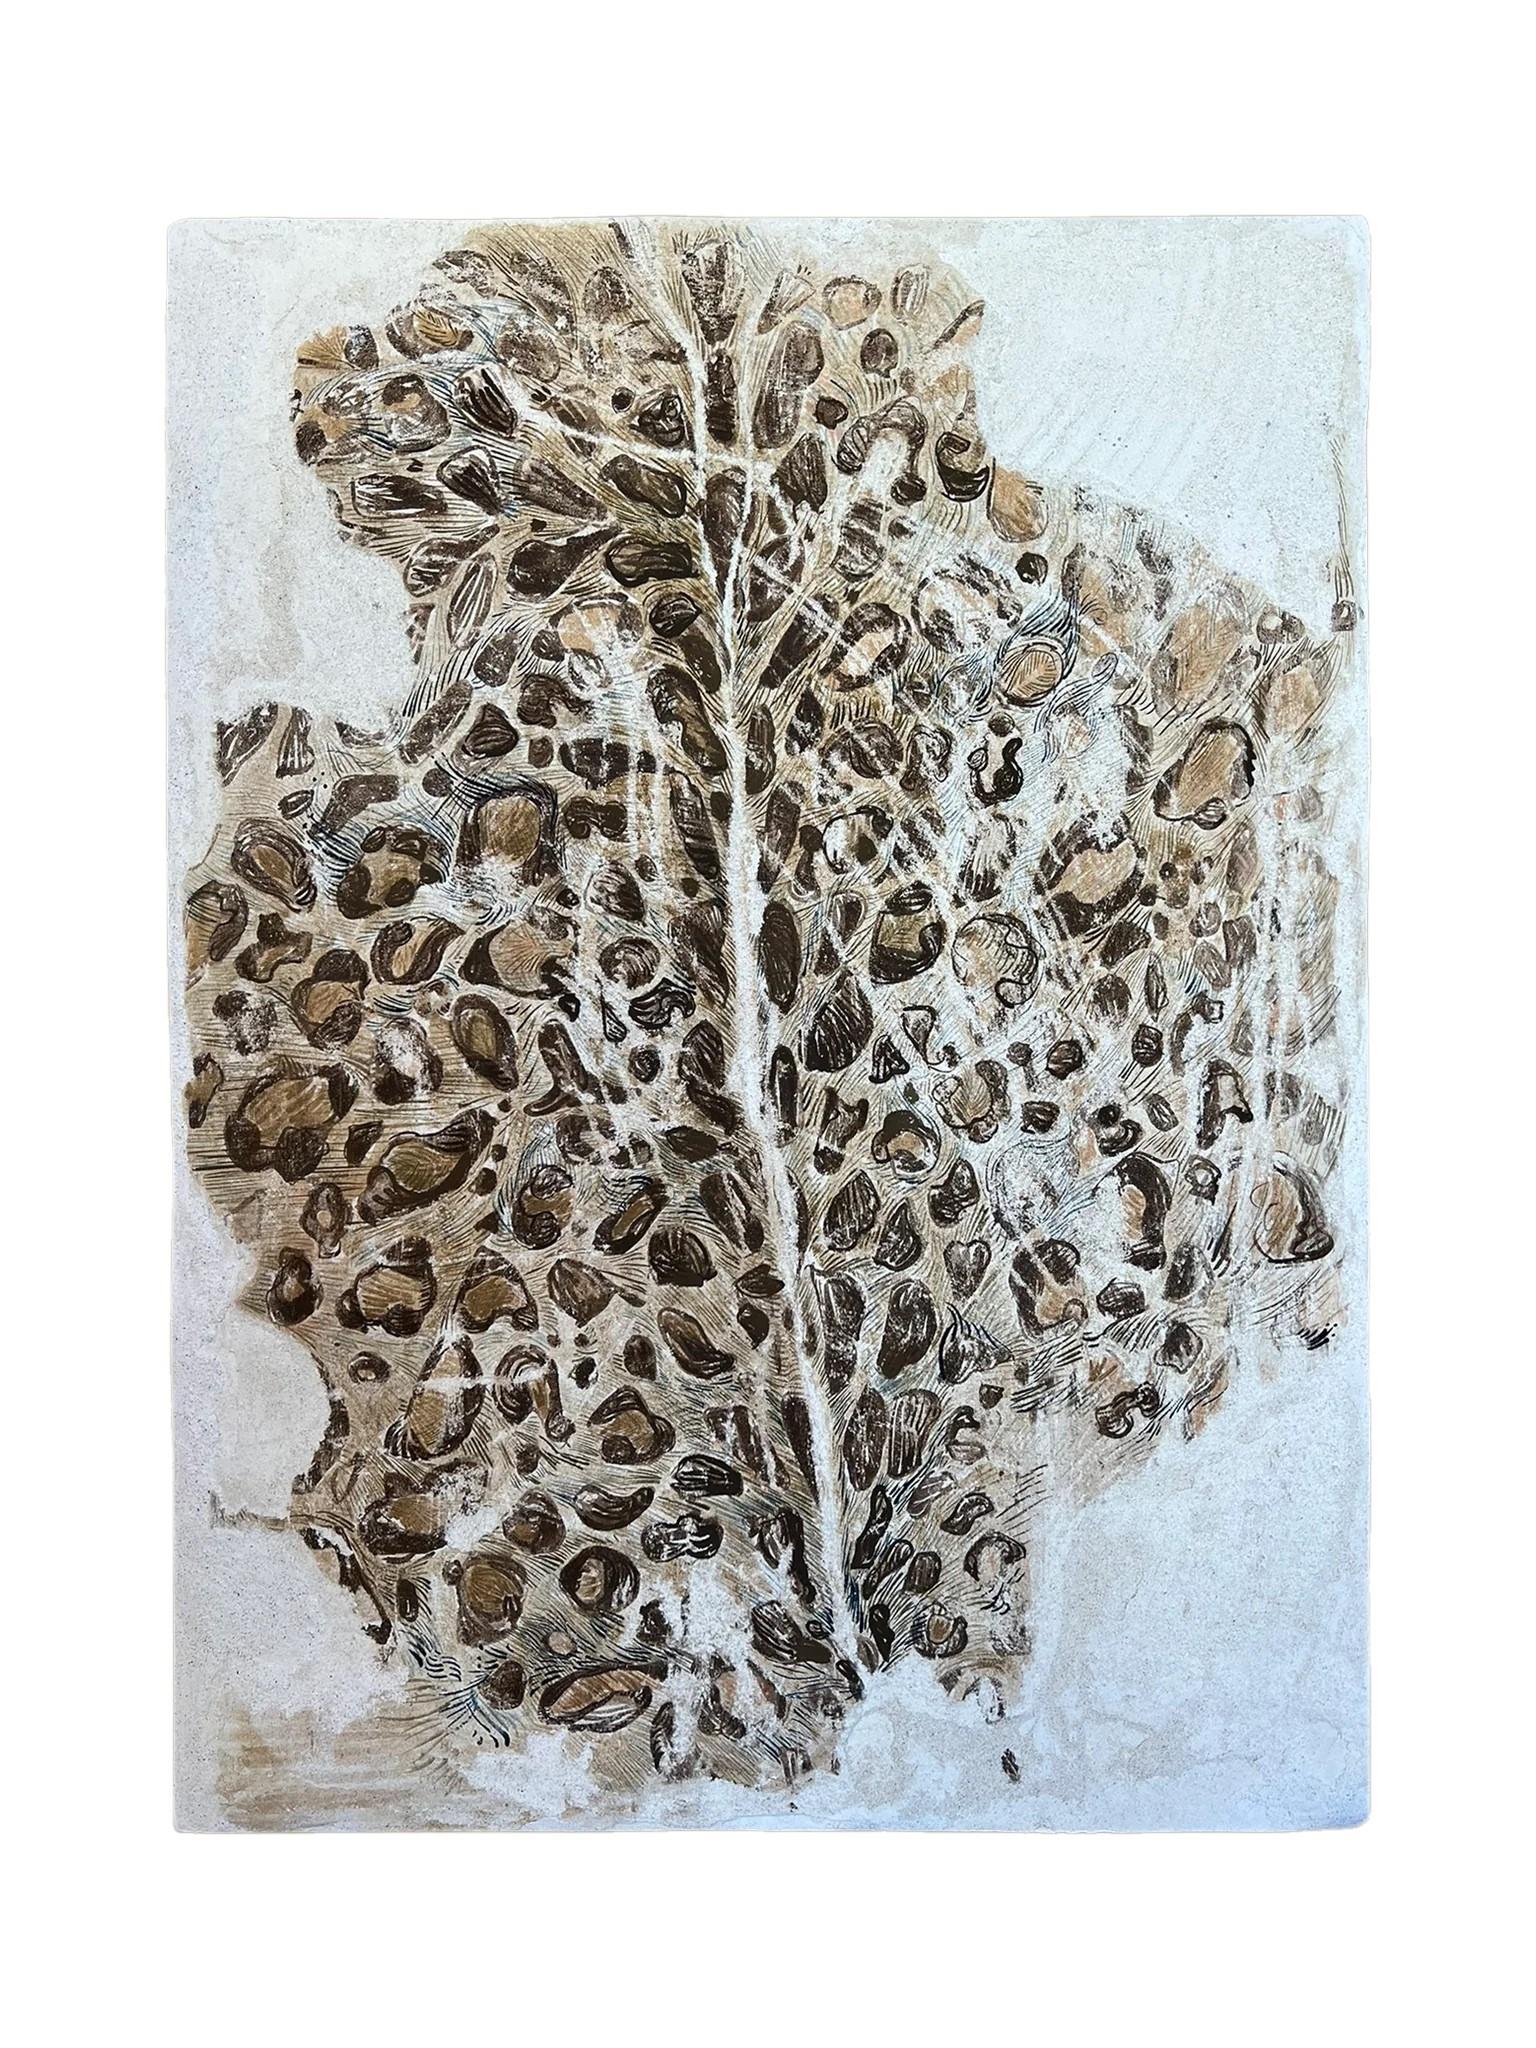 Leopard Skin I by Elena Rousseau.

The piece is painted with plaster, mineral paint, and 24k shell gold on board.

The work of any artist is ultimately this— to give observation and imagination a body. It is to look at the world closely and